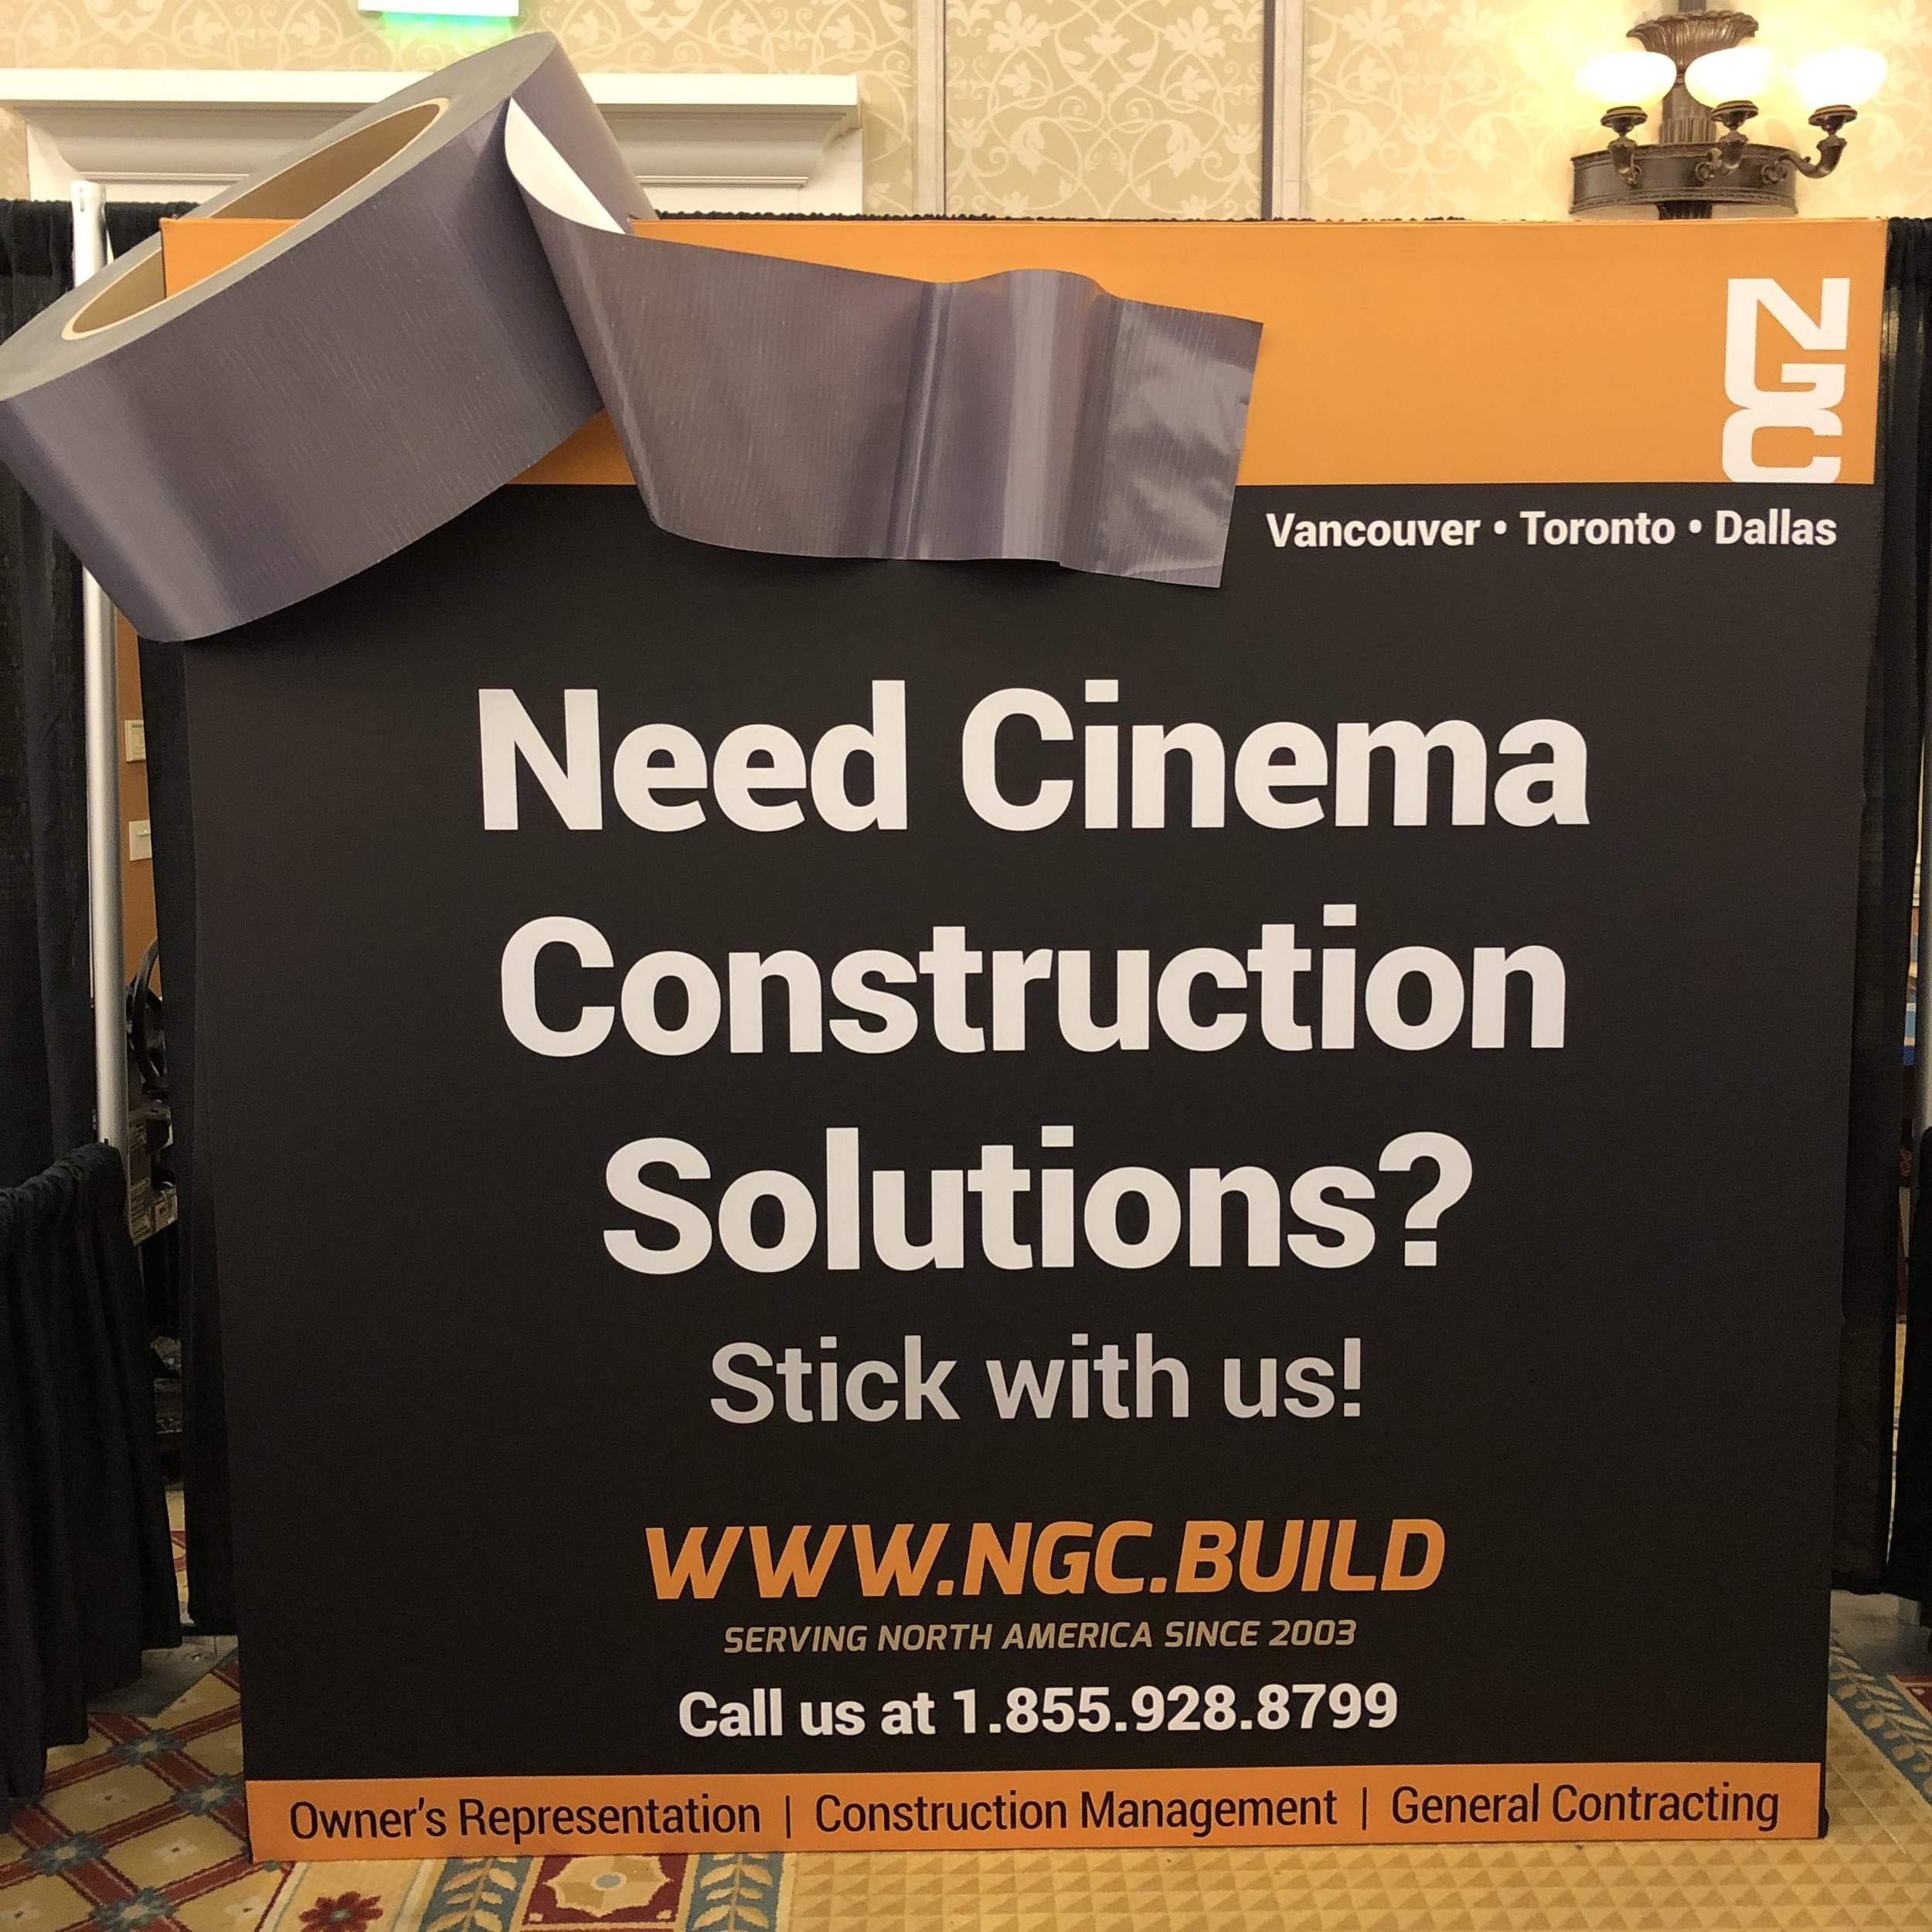 WORLD’S LARGEST DUCT TAPE ROLL AT CINEMACON PHOTO: NGC CONSTRUCTORS